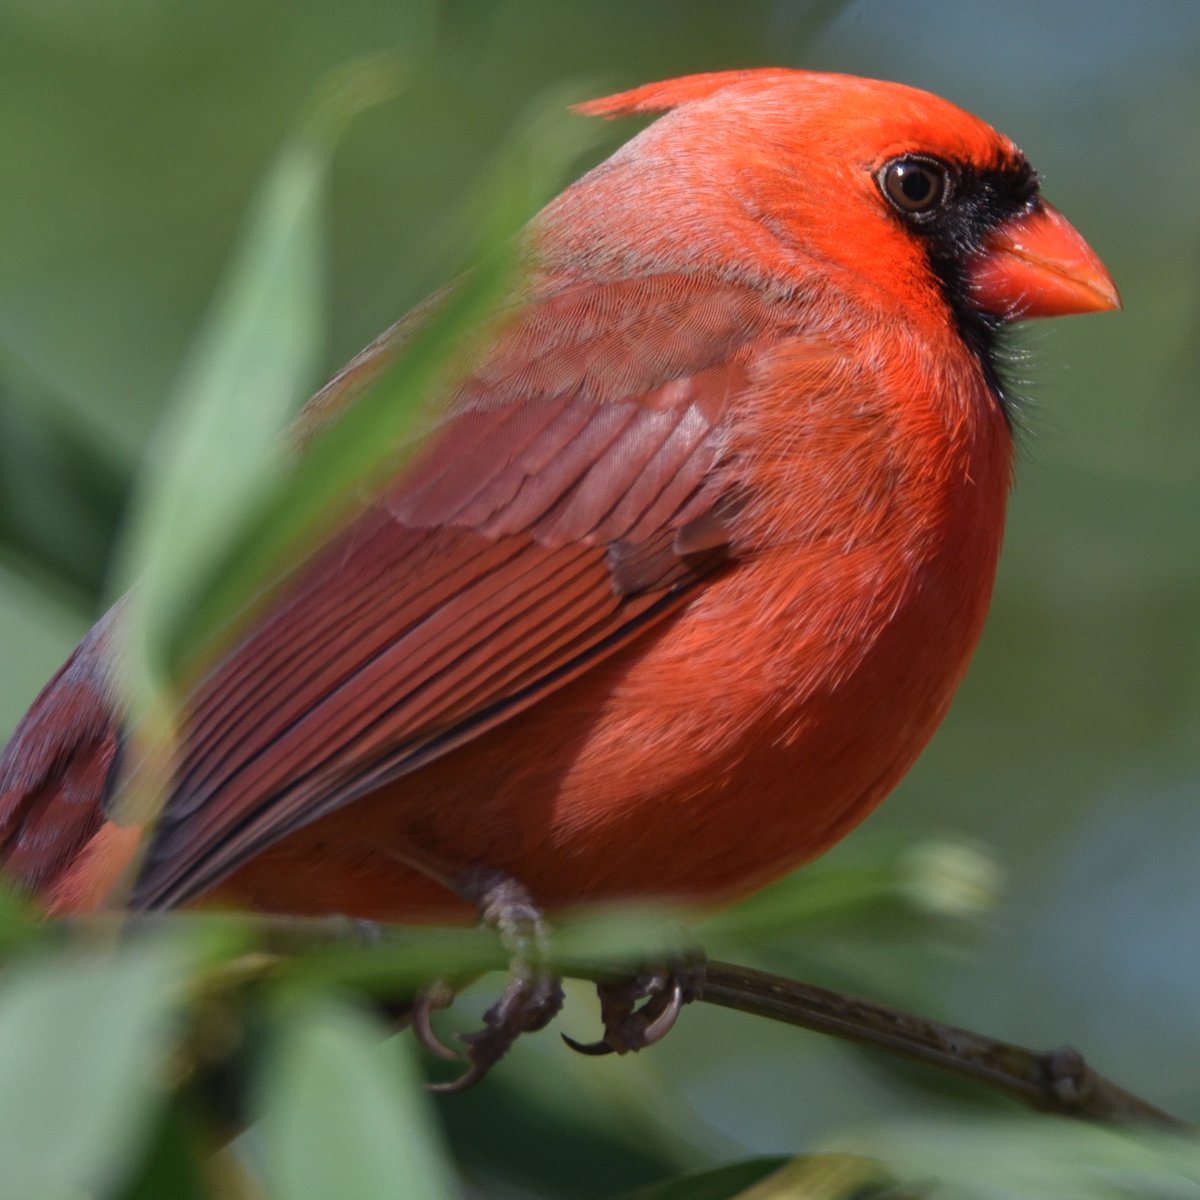 It turns out that Cardinals are the State Bird of North Carolina, Kentucky, Indiana, Illinois, Ohio, Virginia, and West Virginia.  I always thought it was just for North Carolina....BUT NO!!!  ;-)

#cardinaliscardinalis
#northerncardinal
#northerncardinals
#birdphotography
#Birds